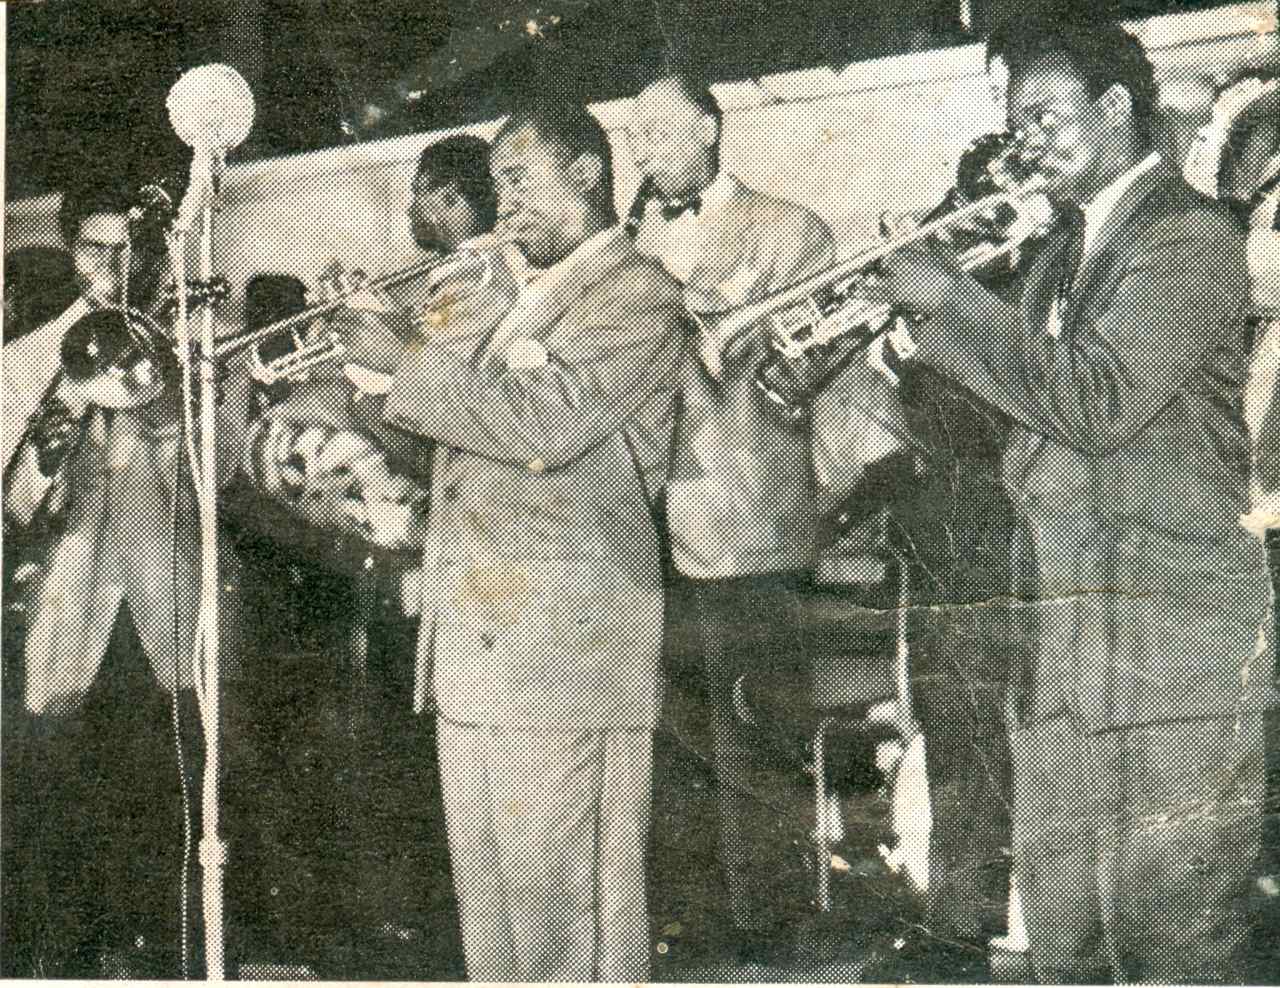 Armstrong and E.T. playing together in 1956